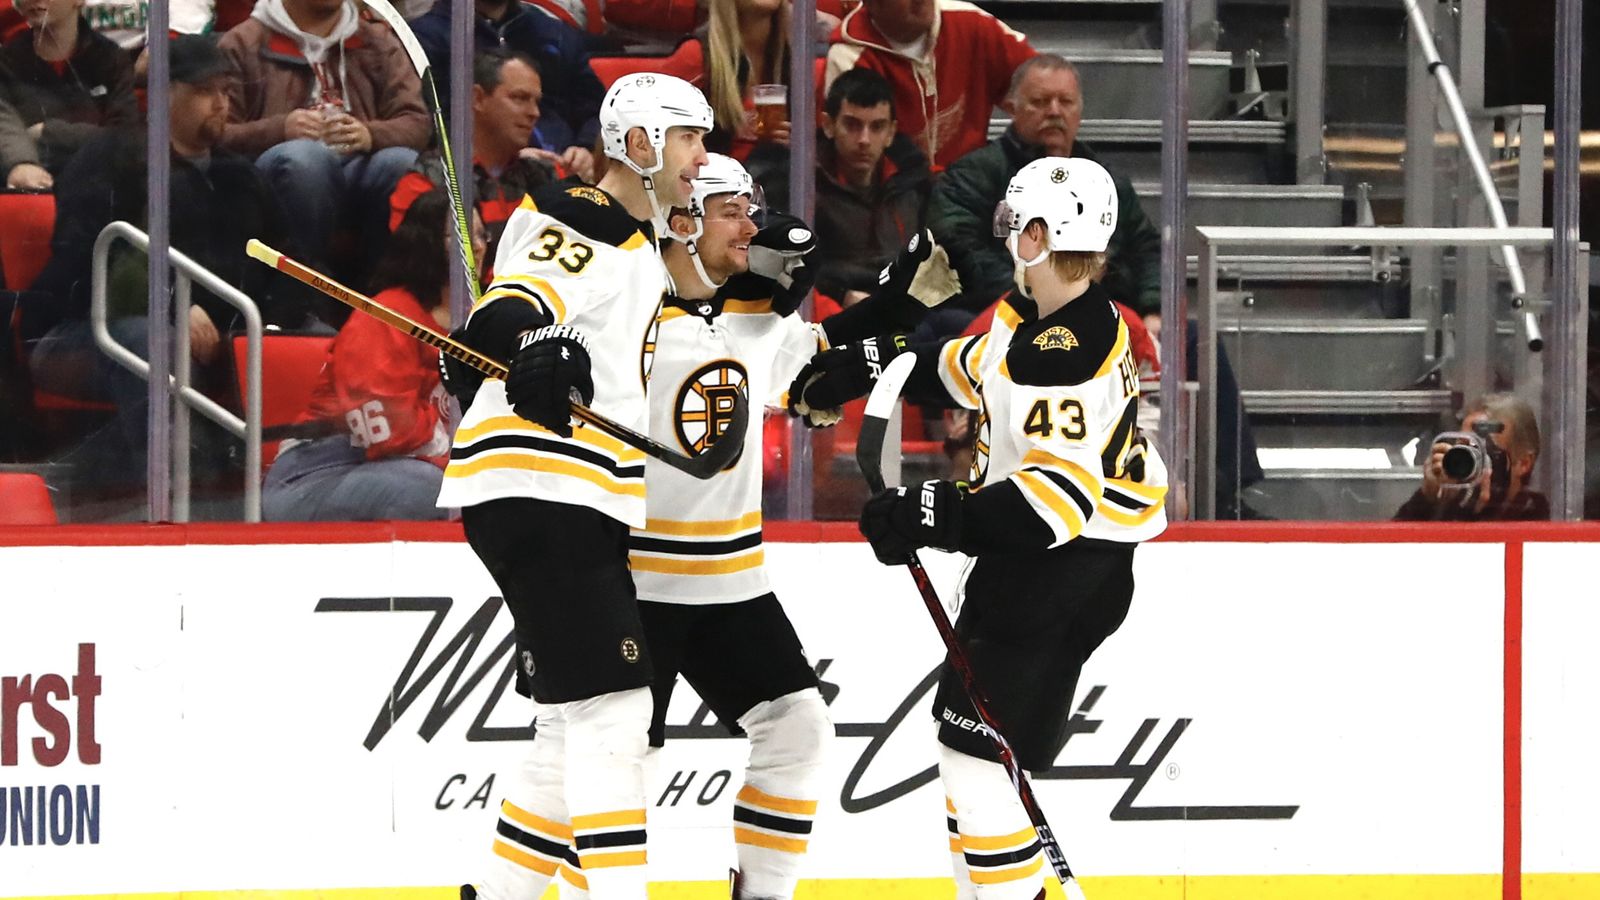 With suspension served, Brad Marchand is set to return Thursday as